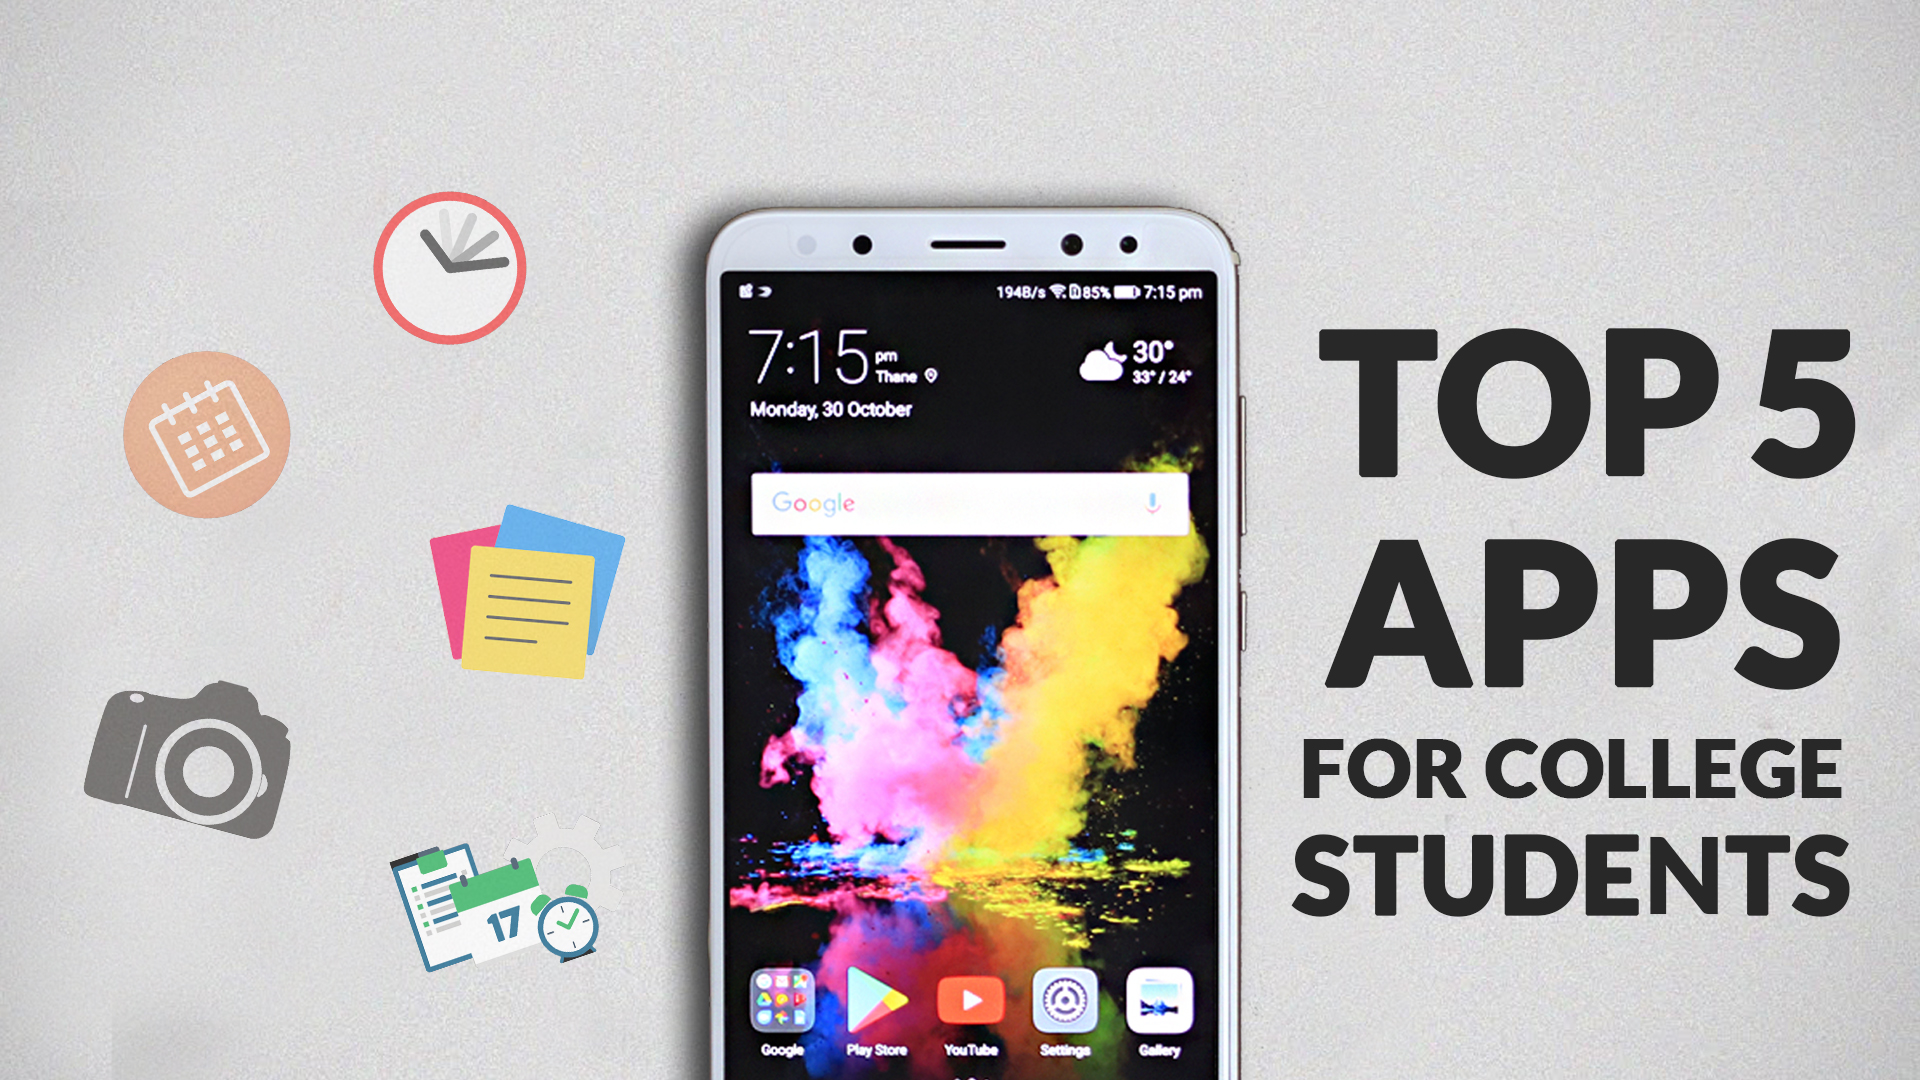 Top 5 apps for college student